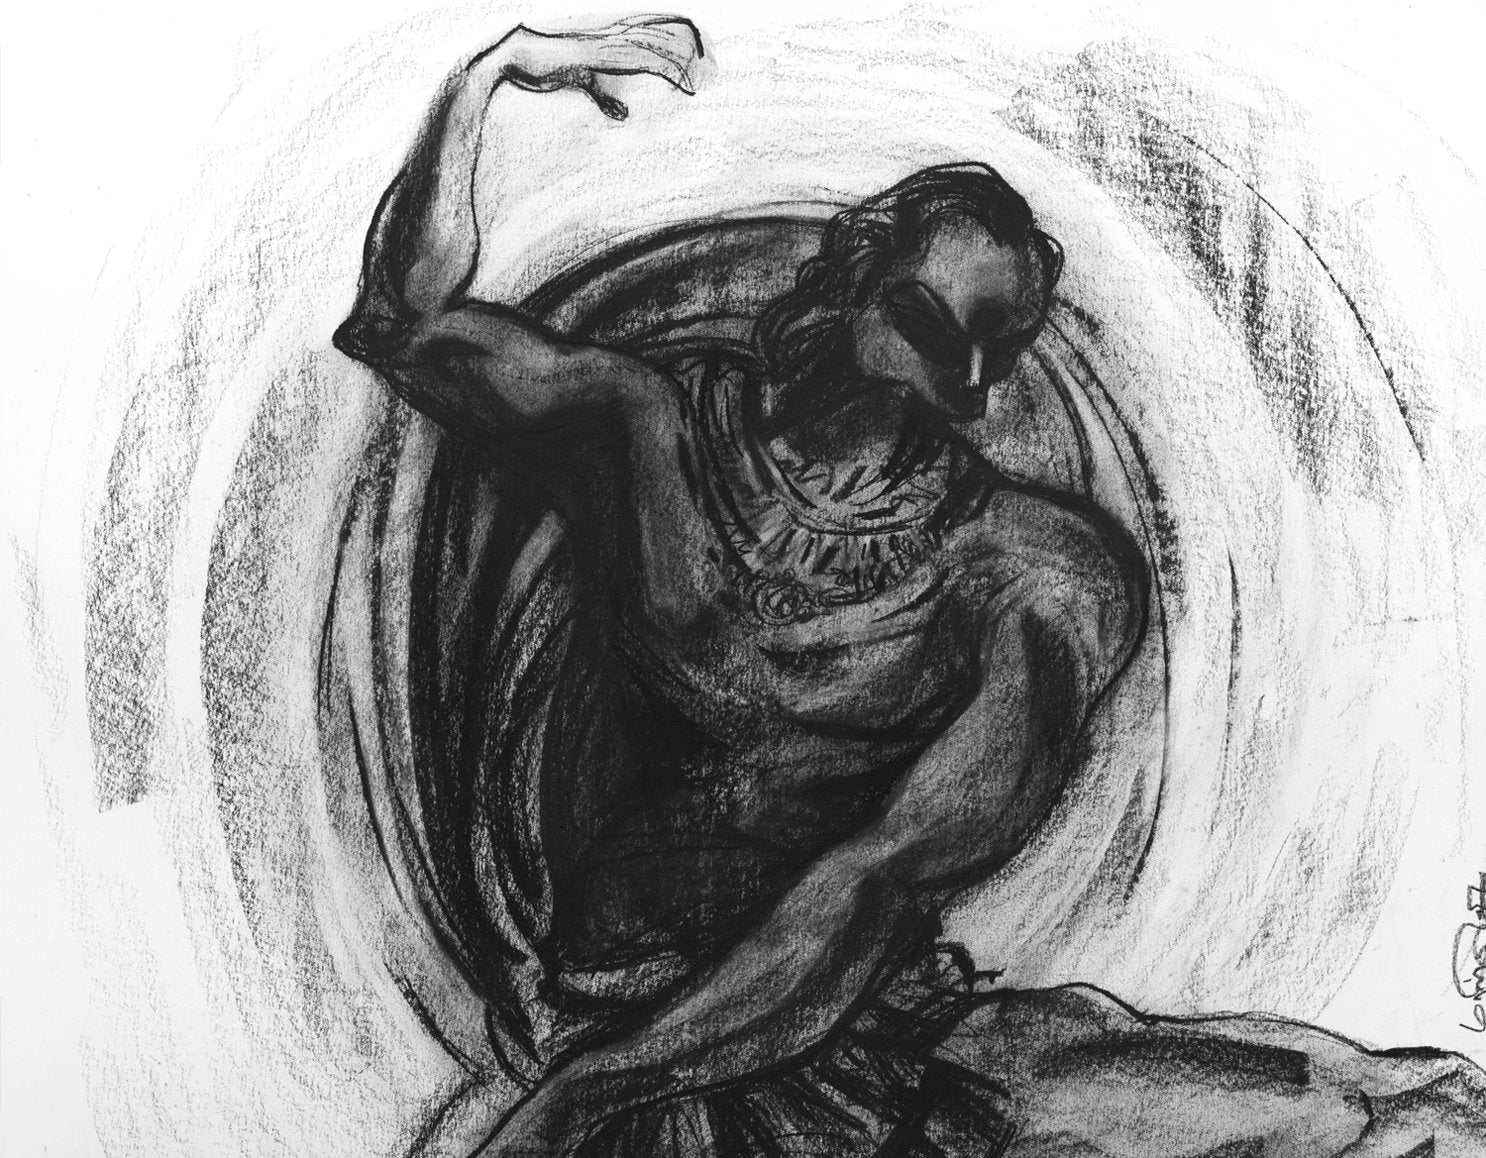 Performer 354|S. Mark Rathinaraj- Charcoal on Board, , 27.5 x 21.5 inches